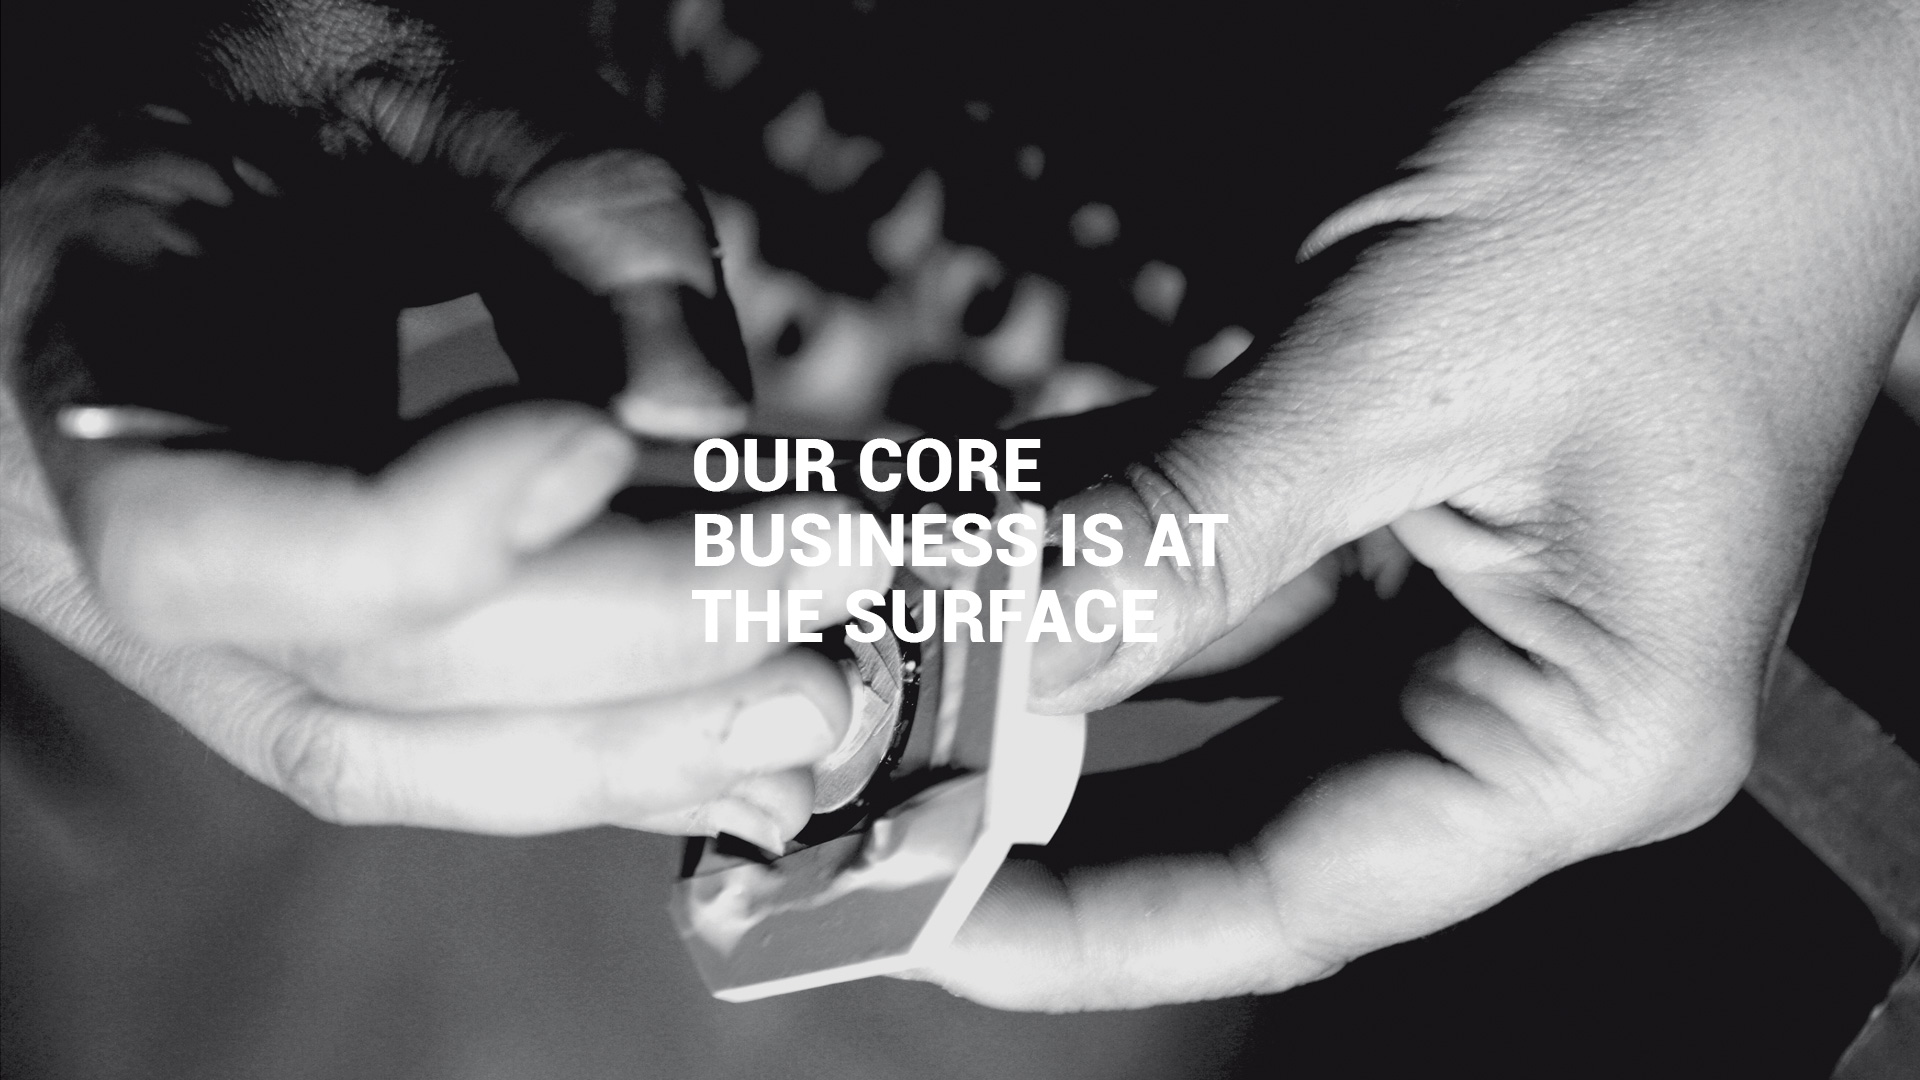 Our core business is at the surface